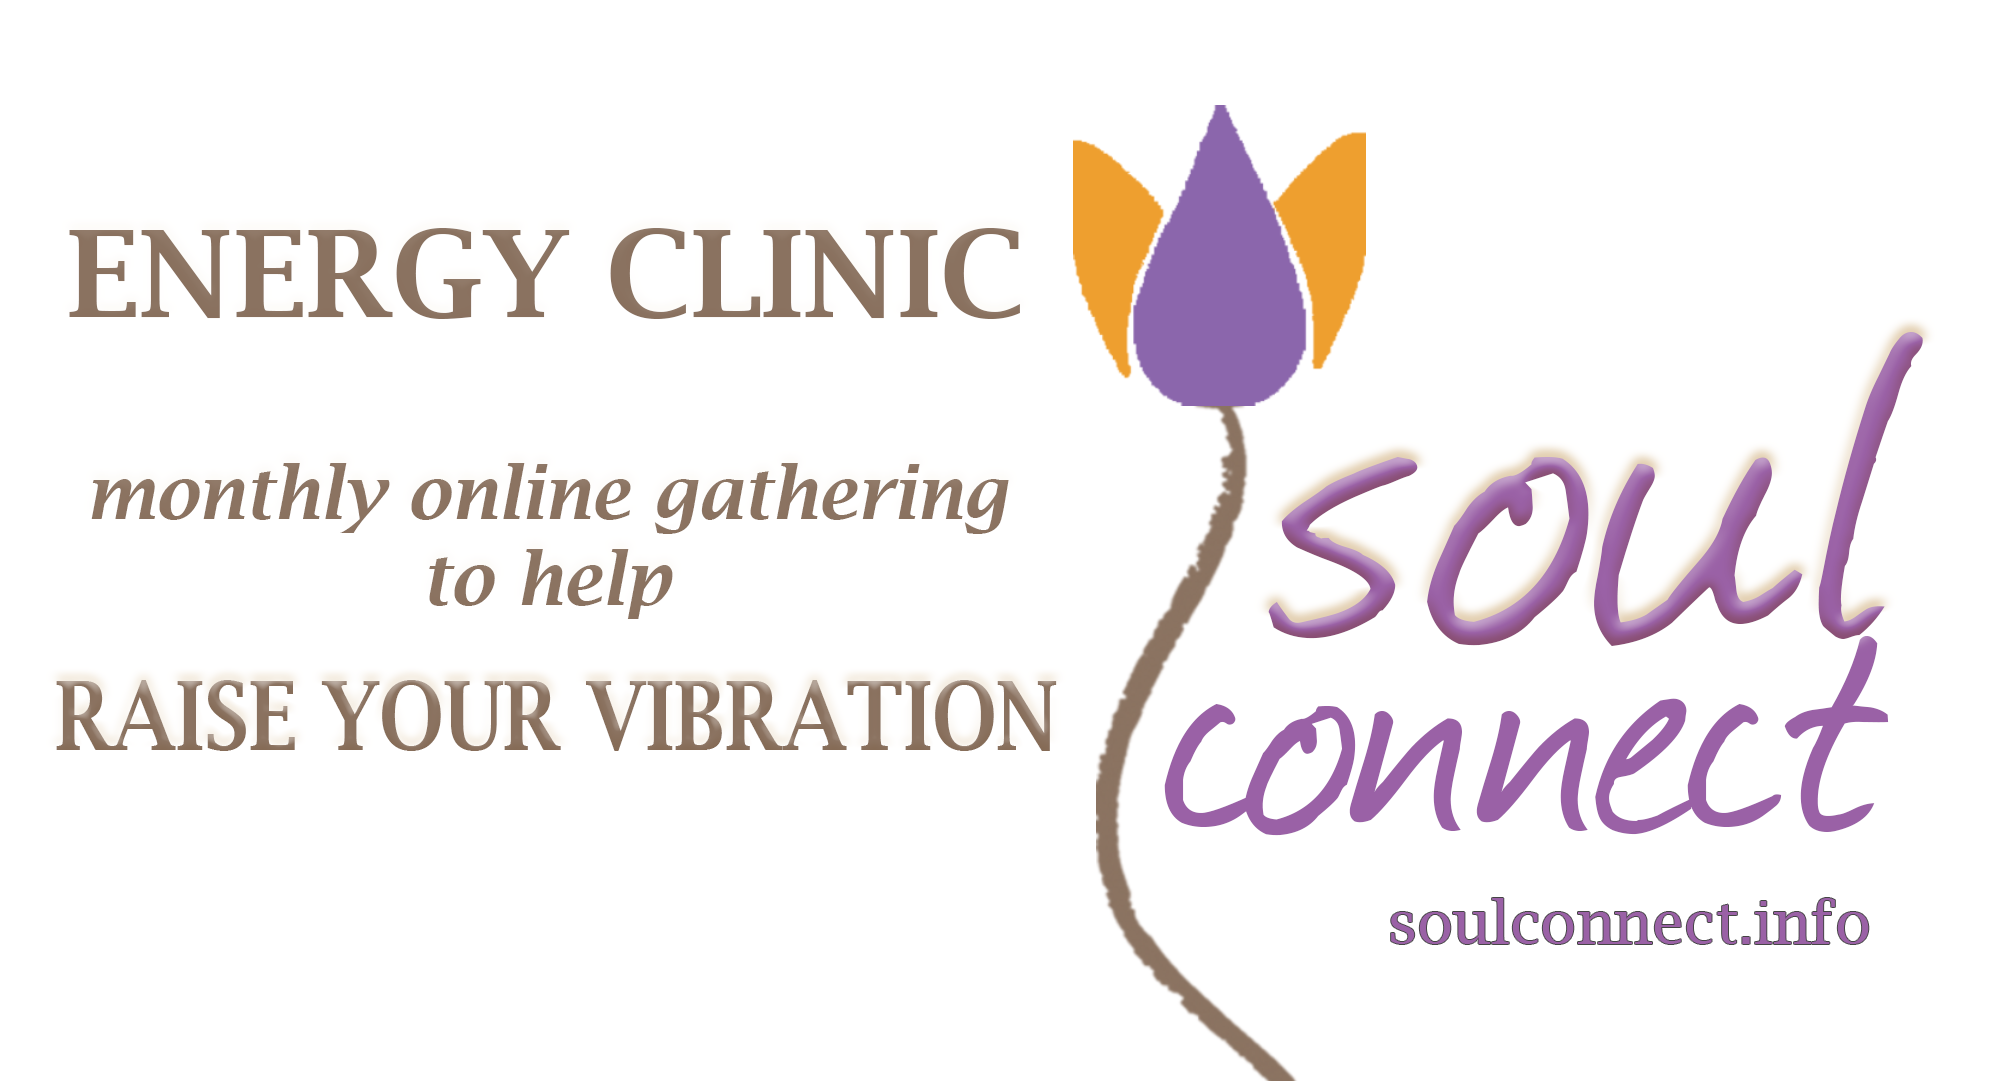 Monthly Gathering: Energy Clinic